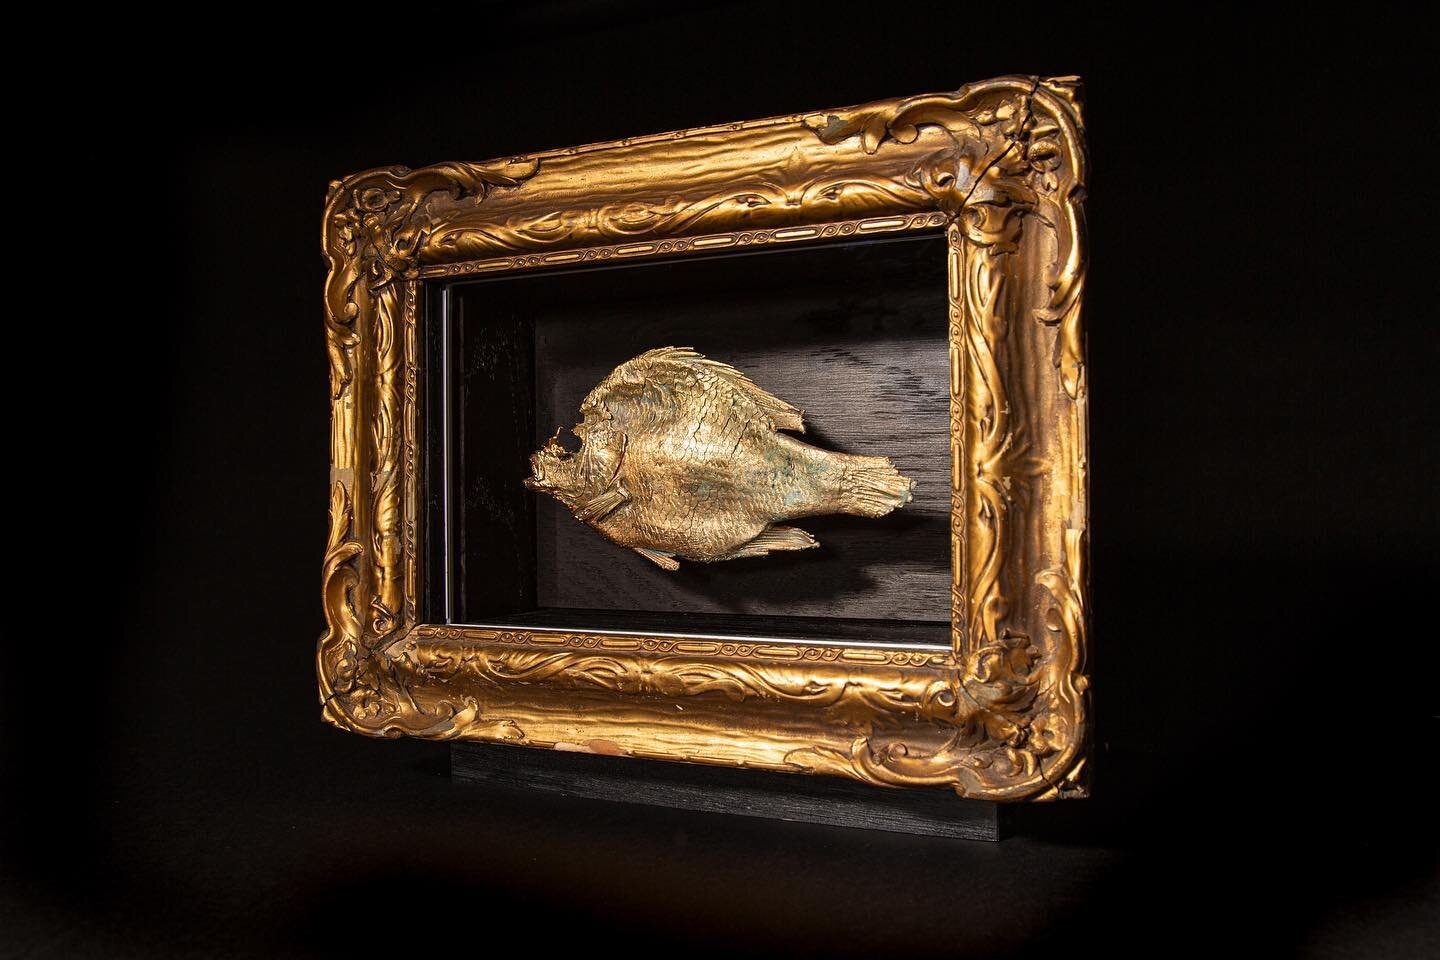 Finished and sold! Gold plated pumpkinseed(?) fish from lake Champlain. Black stained white oak box with custom led lighting and vintage frame. Plating by @cuskulls, photo by the sweet and talented 📷 @haces_lo_que_amas